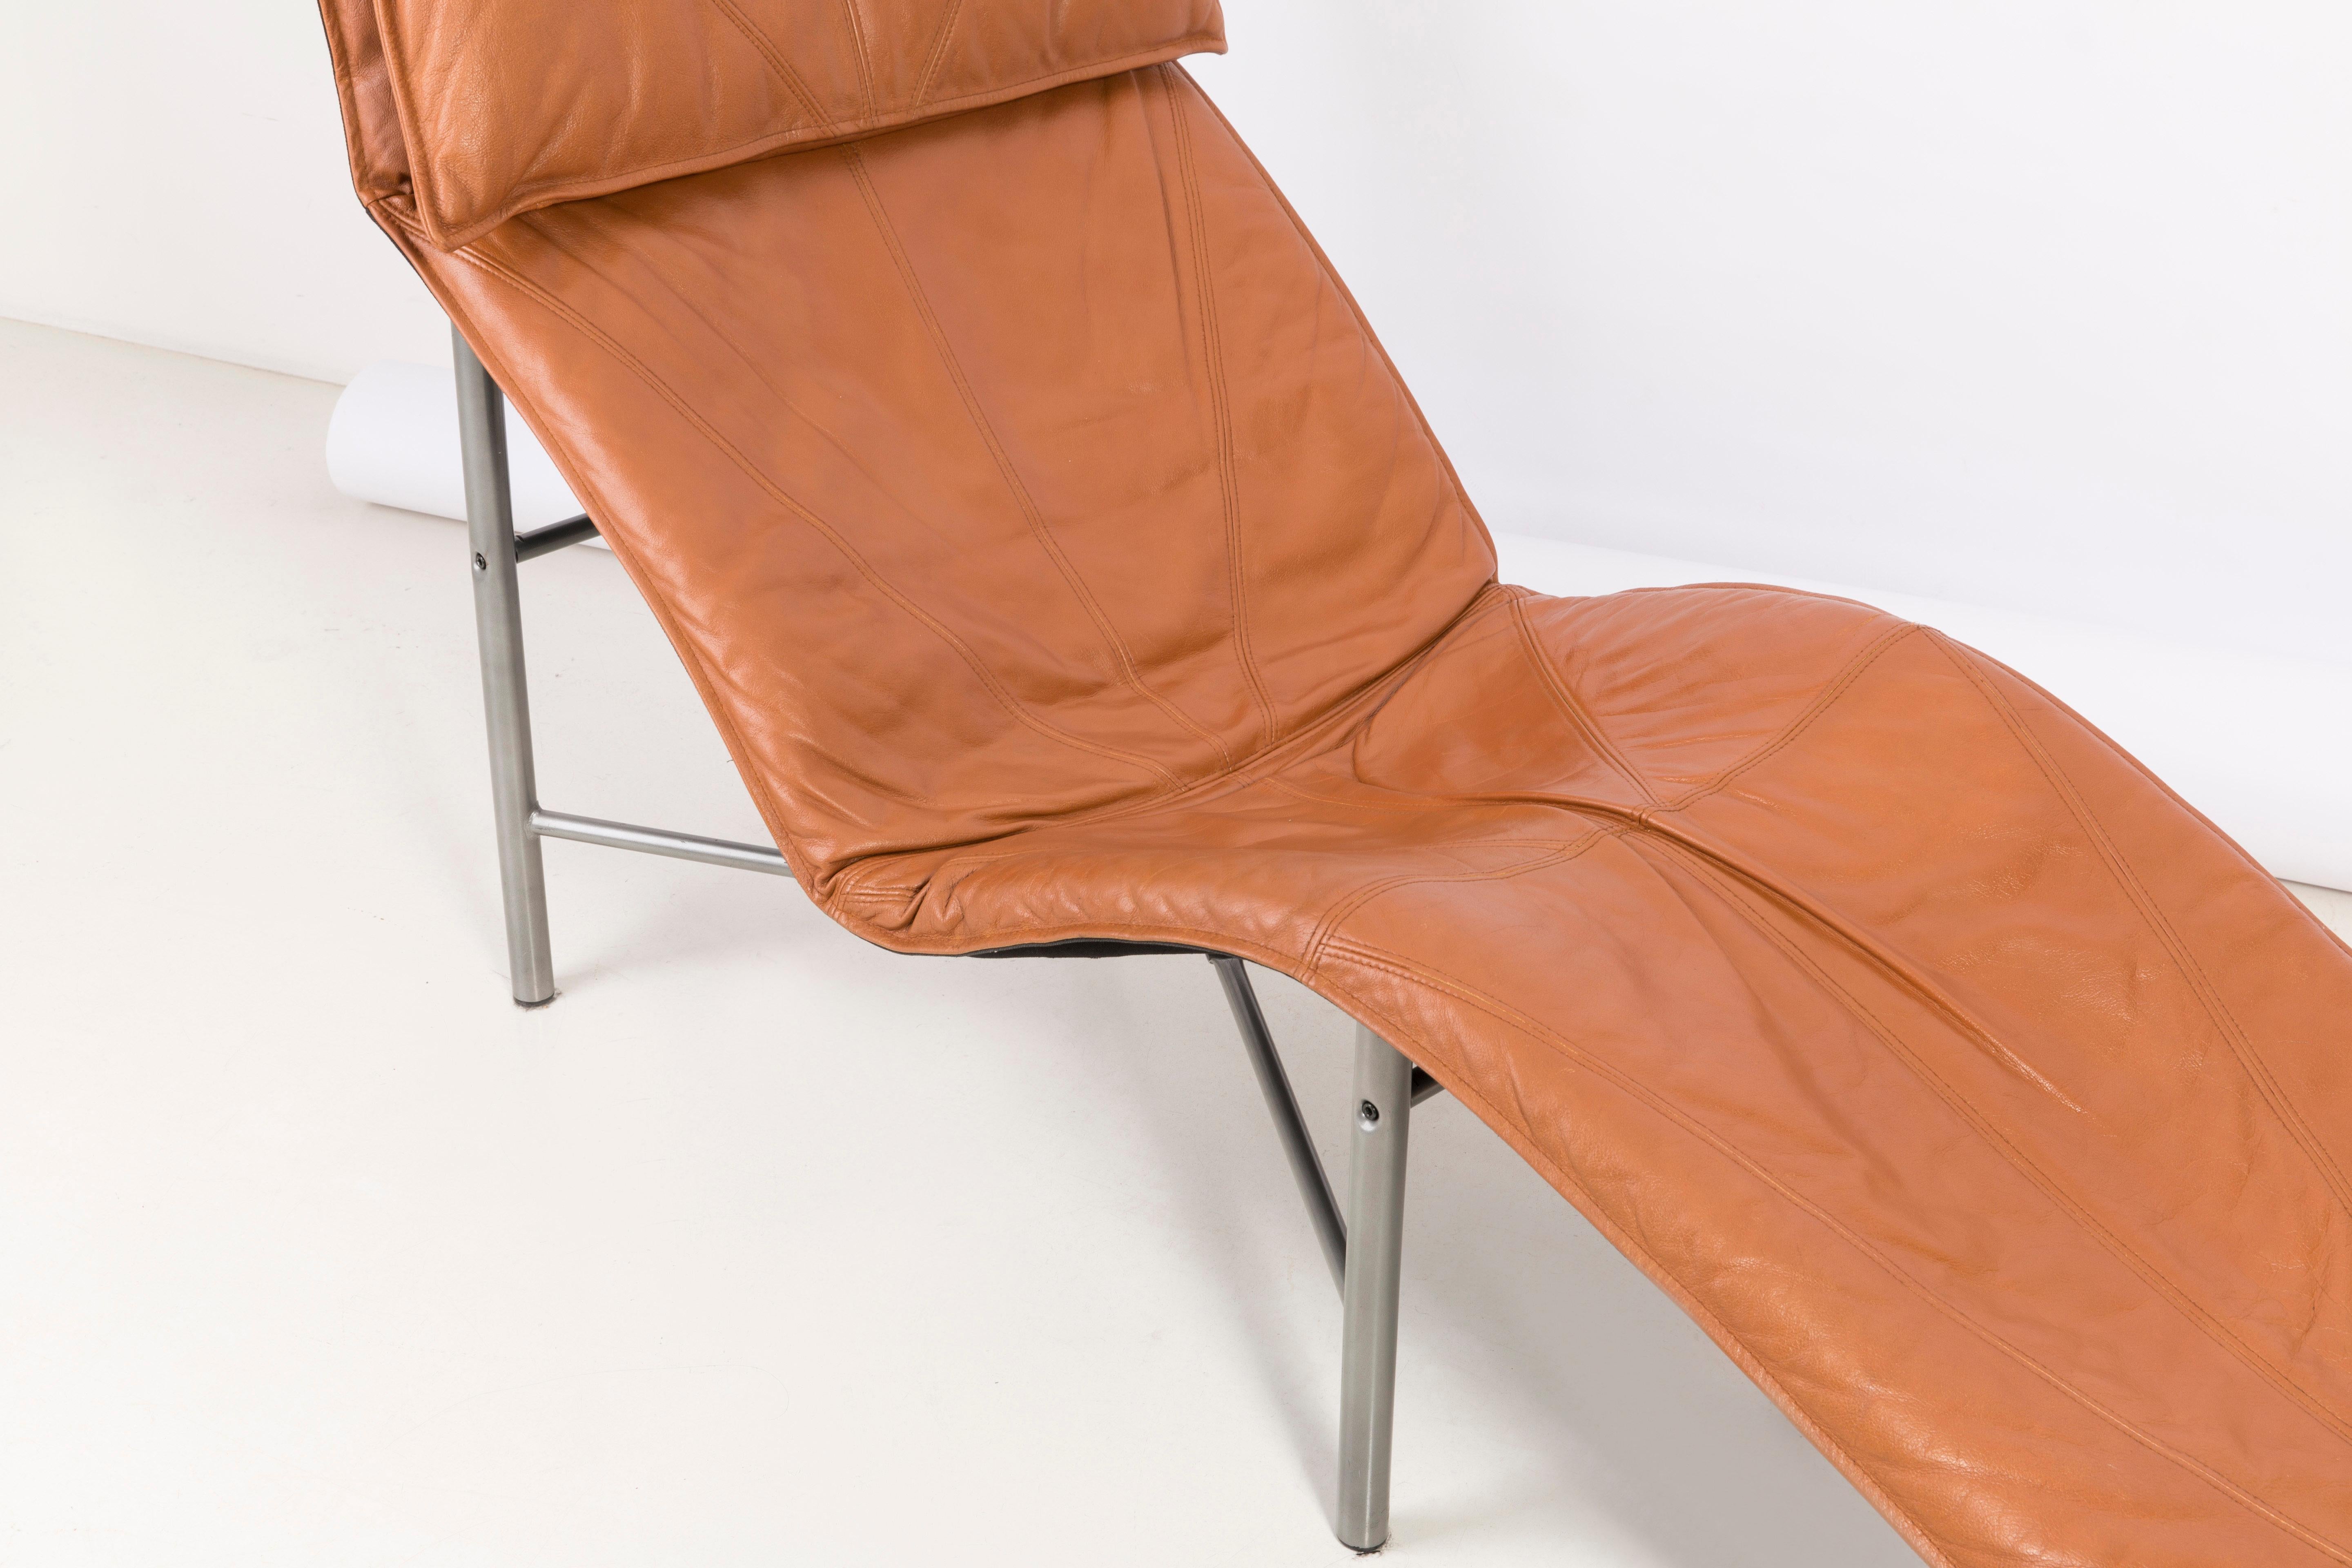 Two Midcentury Danish Modern Leather Chaise Lounge Chairs, Tord Björklund, 1980 In Good Condition For Sale In 05-080 Hornowek, PL